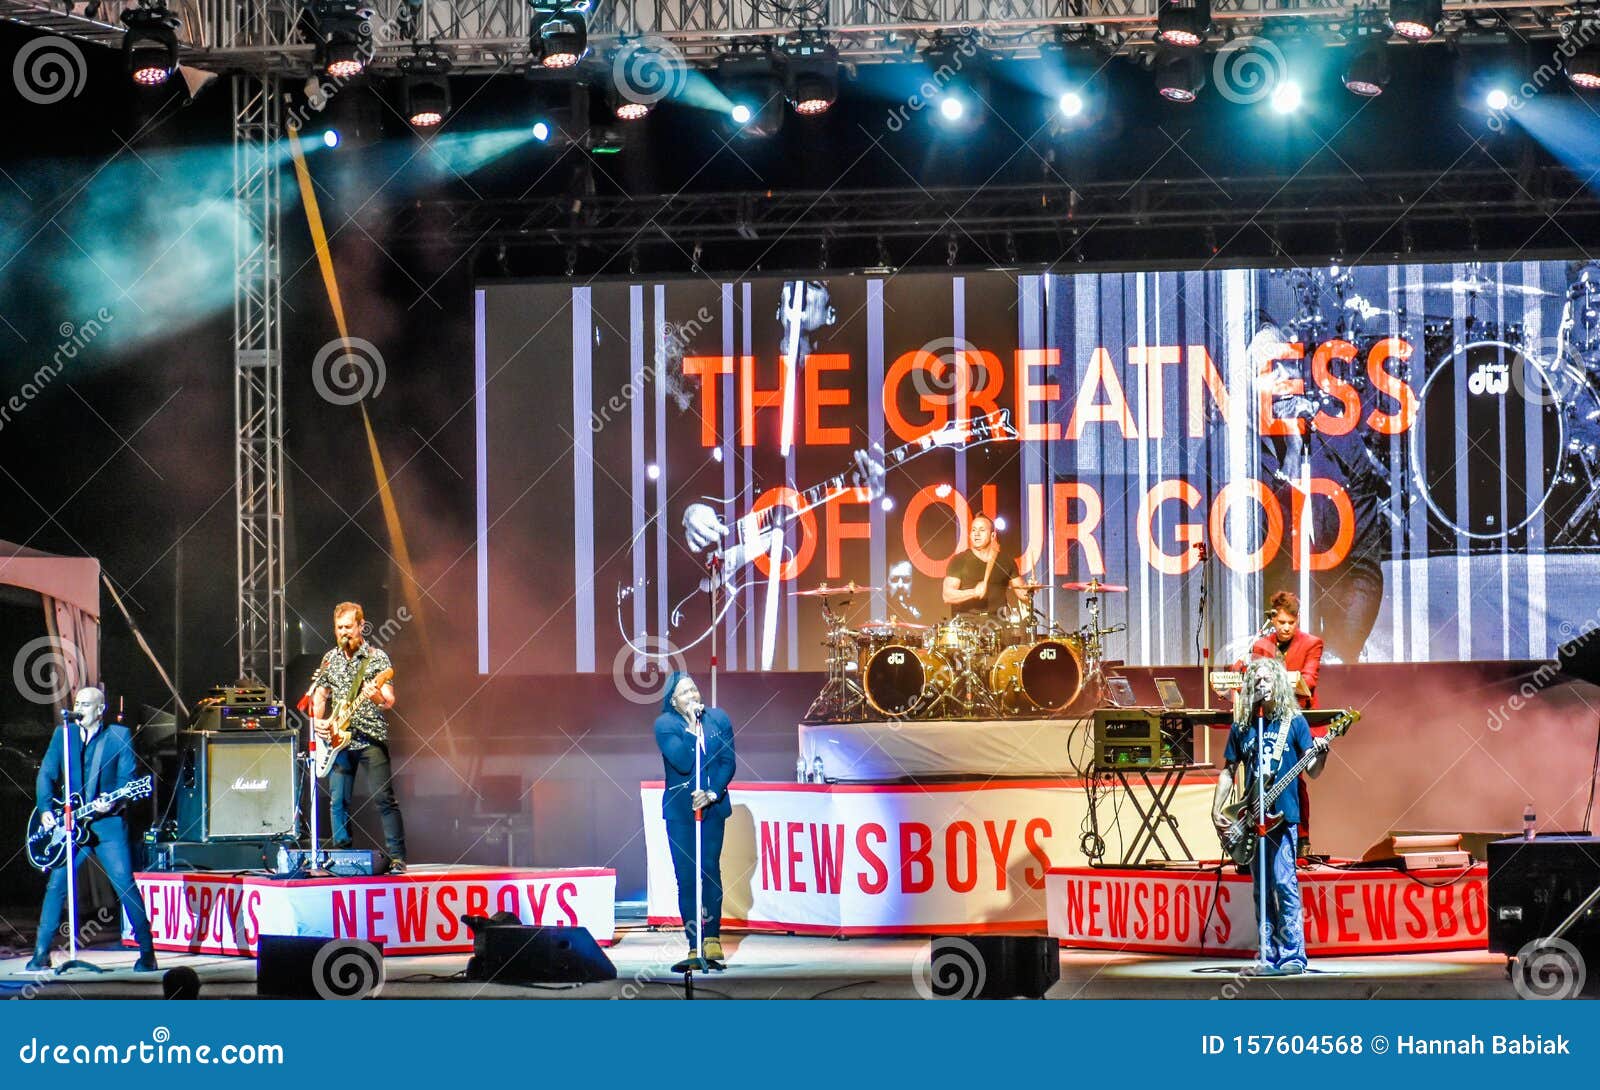 Newsboys United Concert, The Greatness Of Our God Editorial Stock Photo